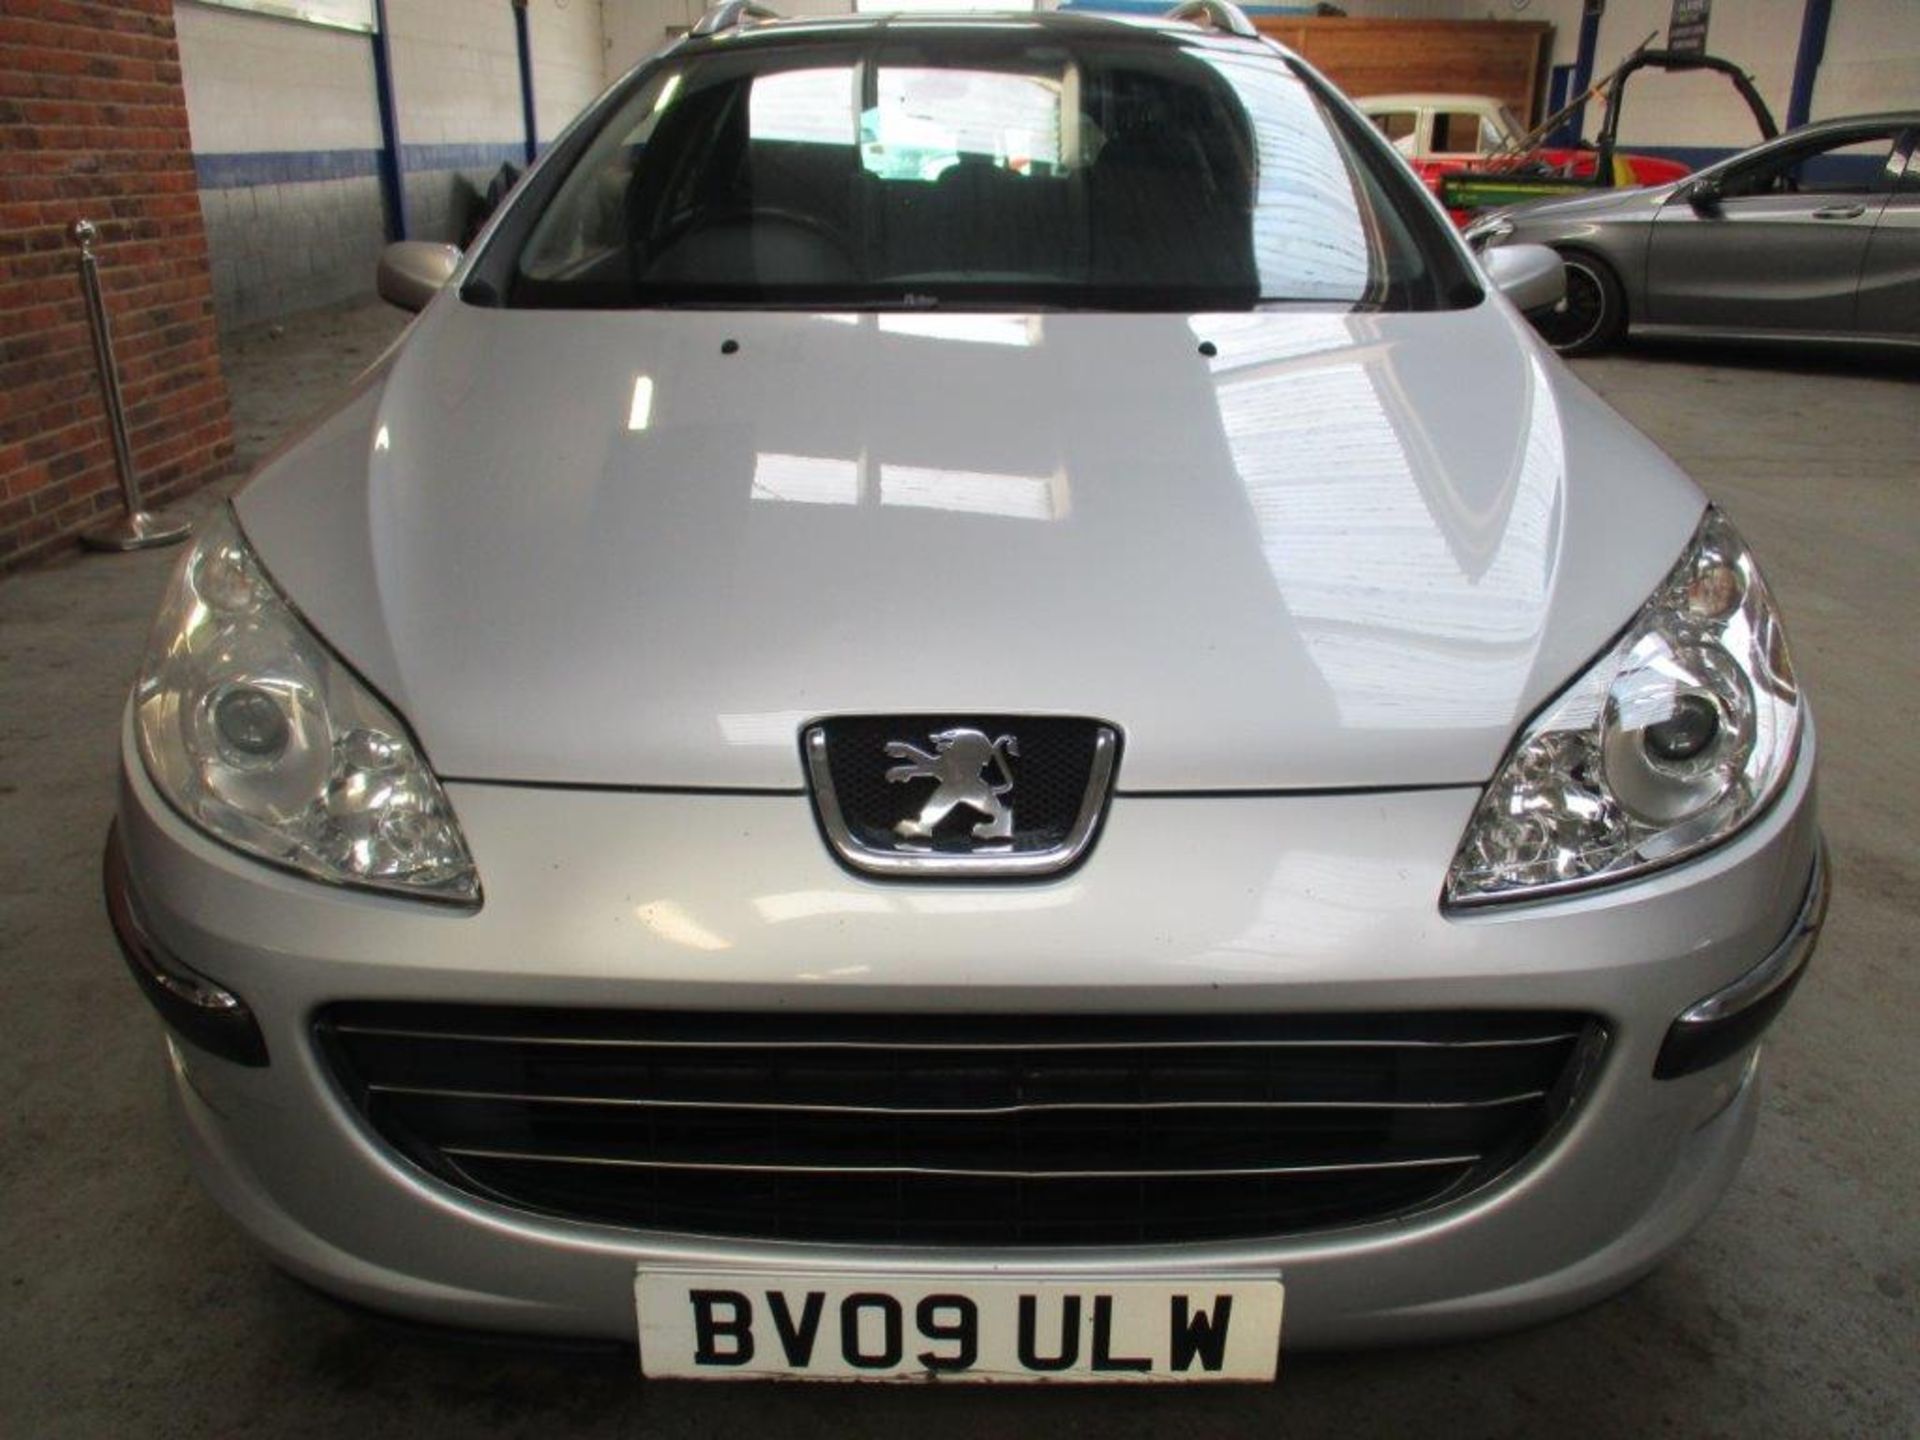 09 09 Peugeot 407 SW - Image 4 of 22